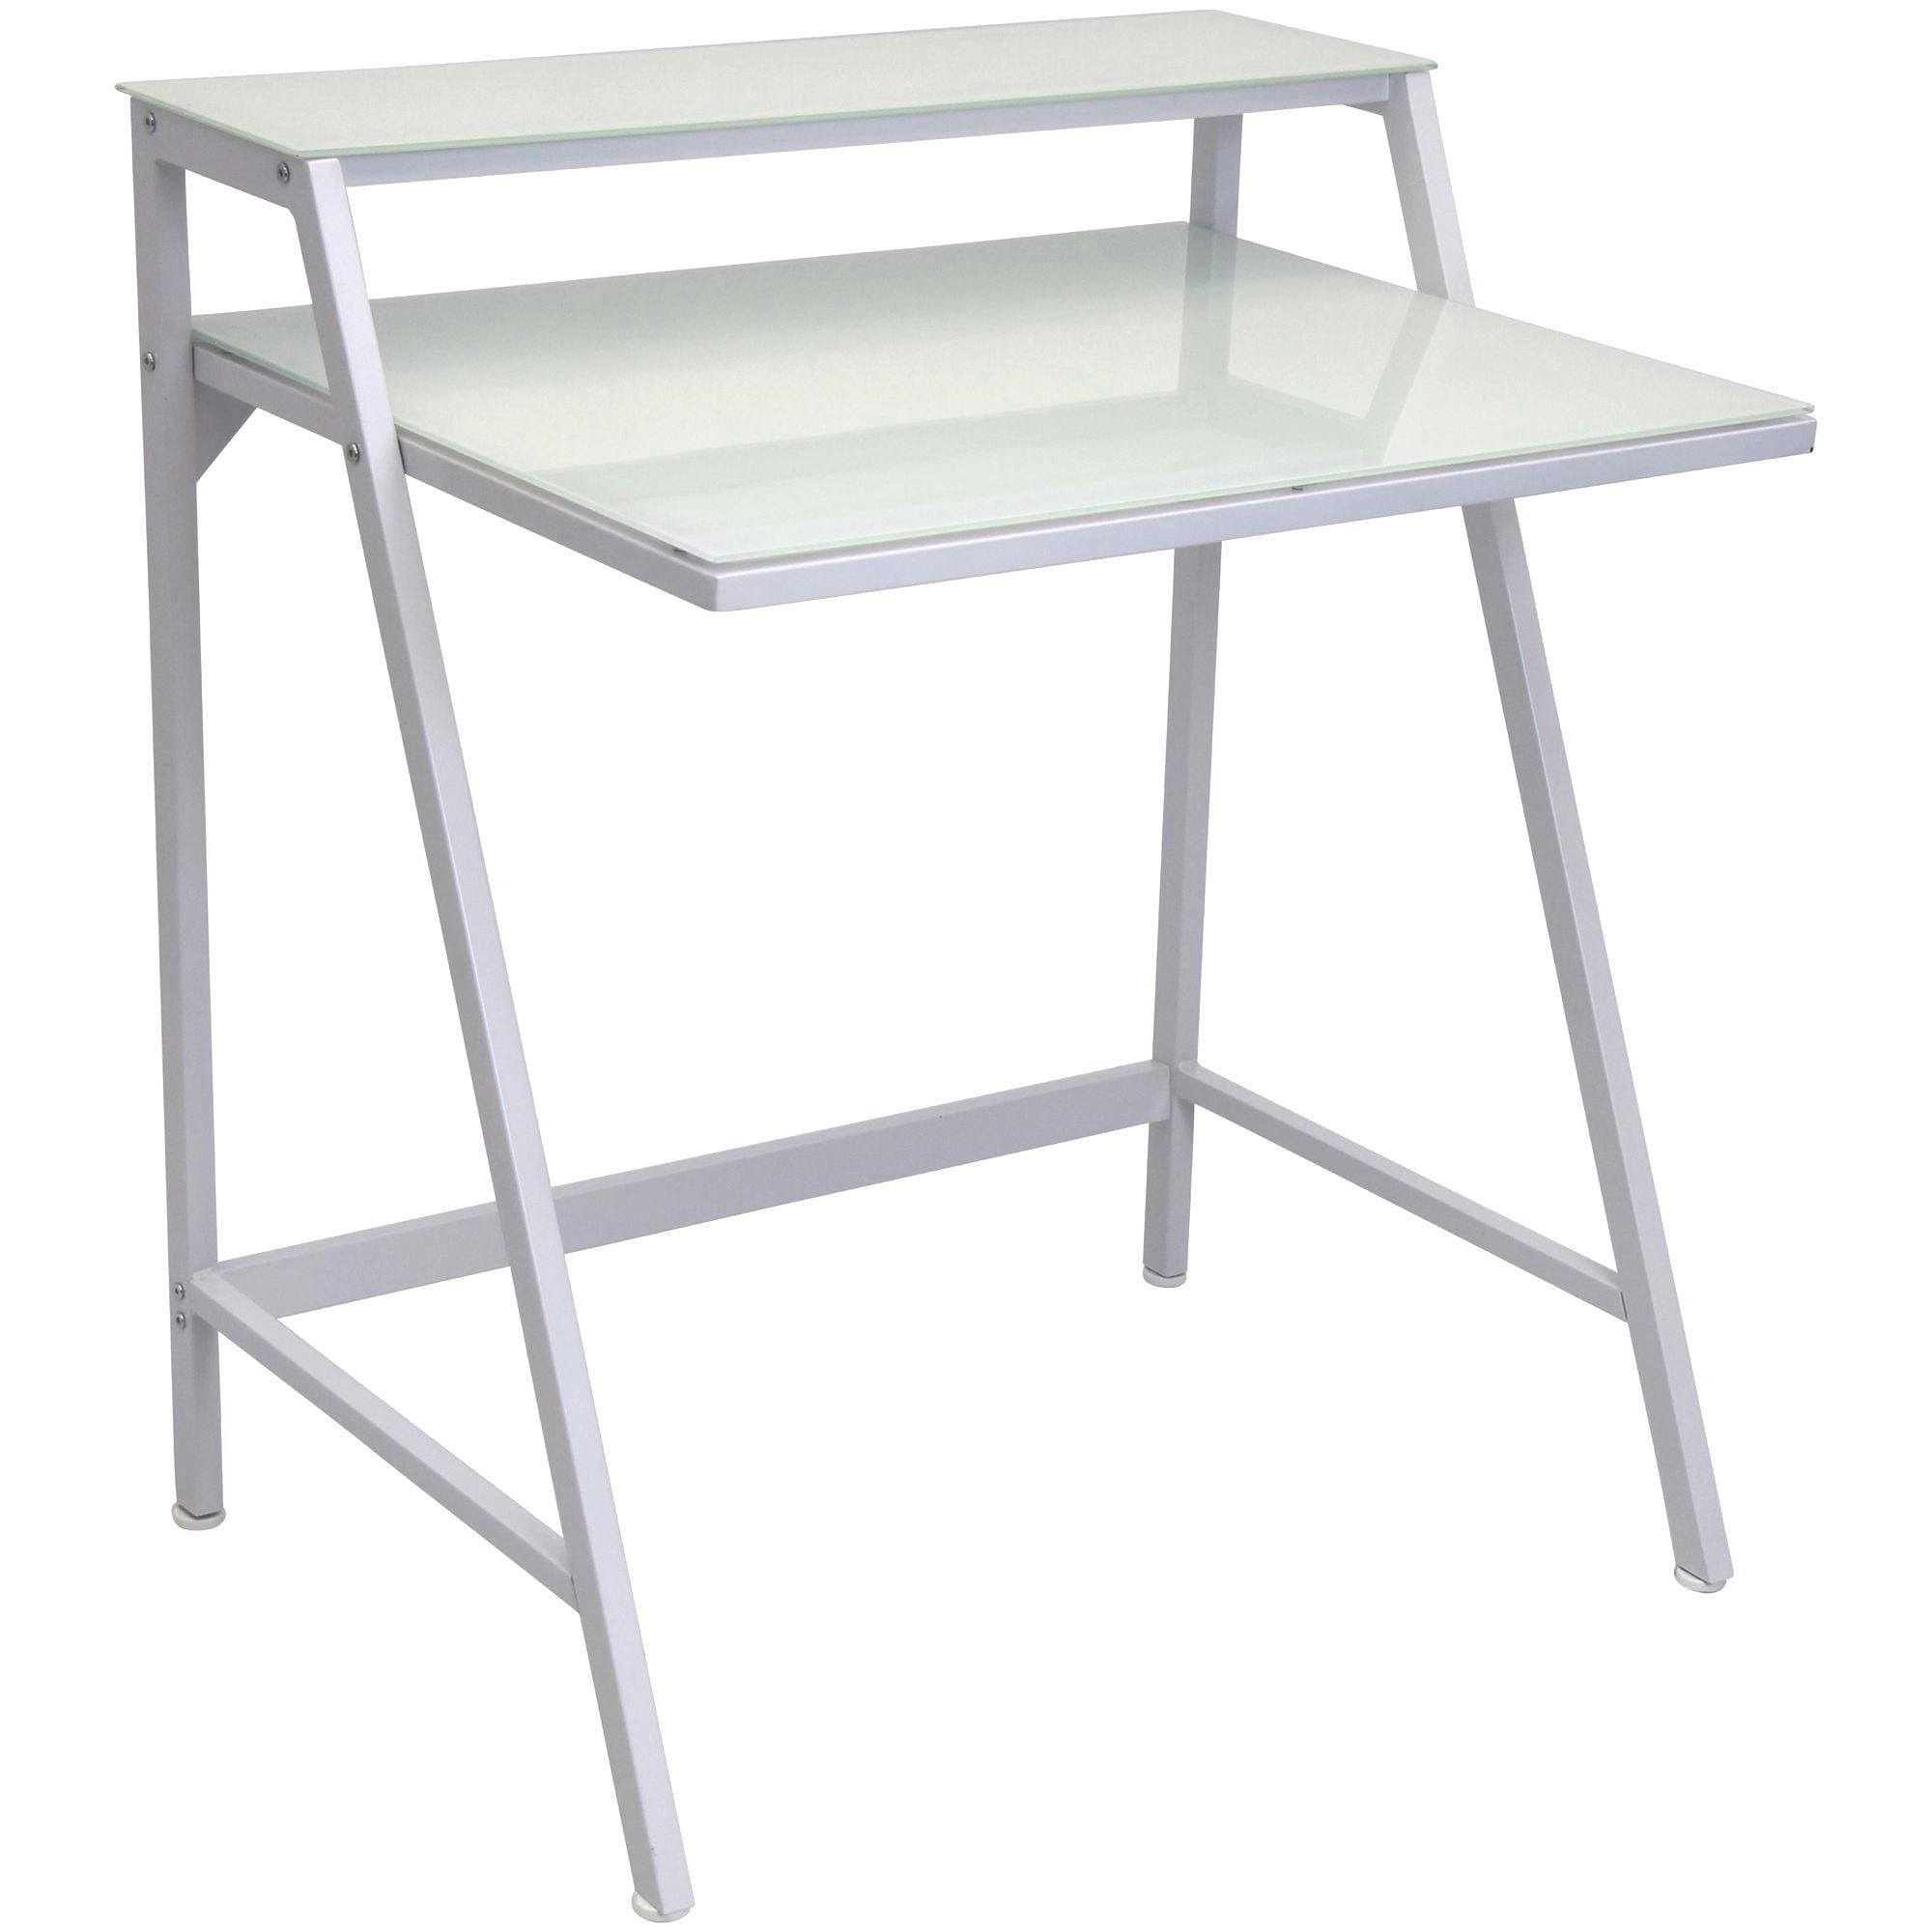 Contemporary White Glass-Top Desk with Metal Legs and Storage Hutch